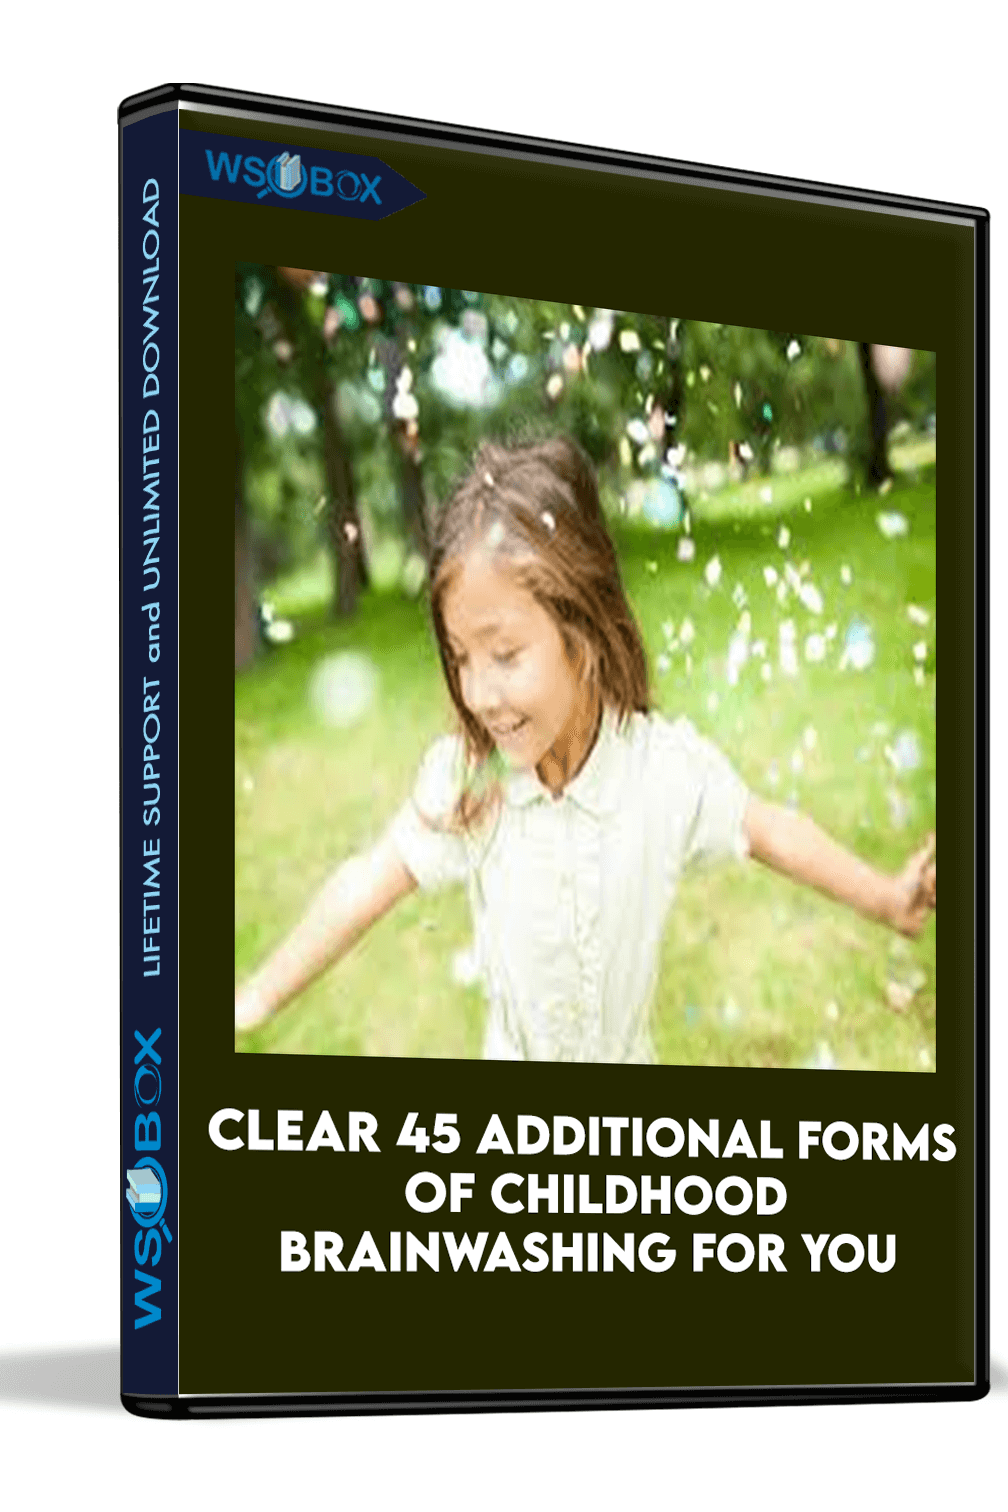 Clear 45 Additional Forms of Childhood Brainwashing for you and 73 Generations of your Ancestors...